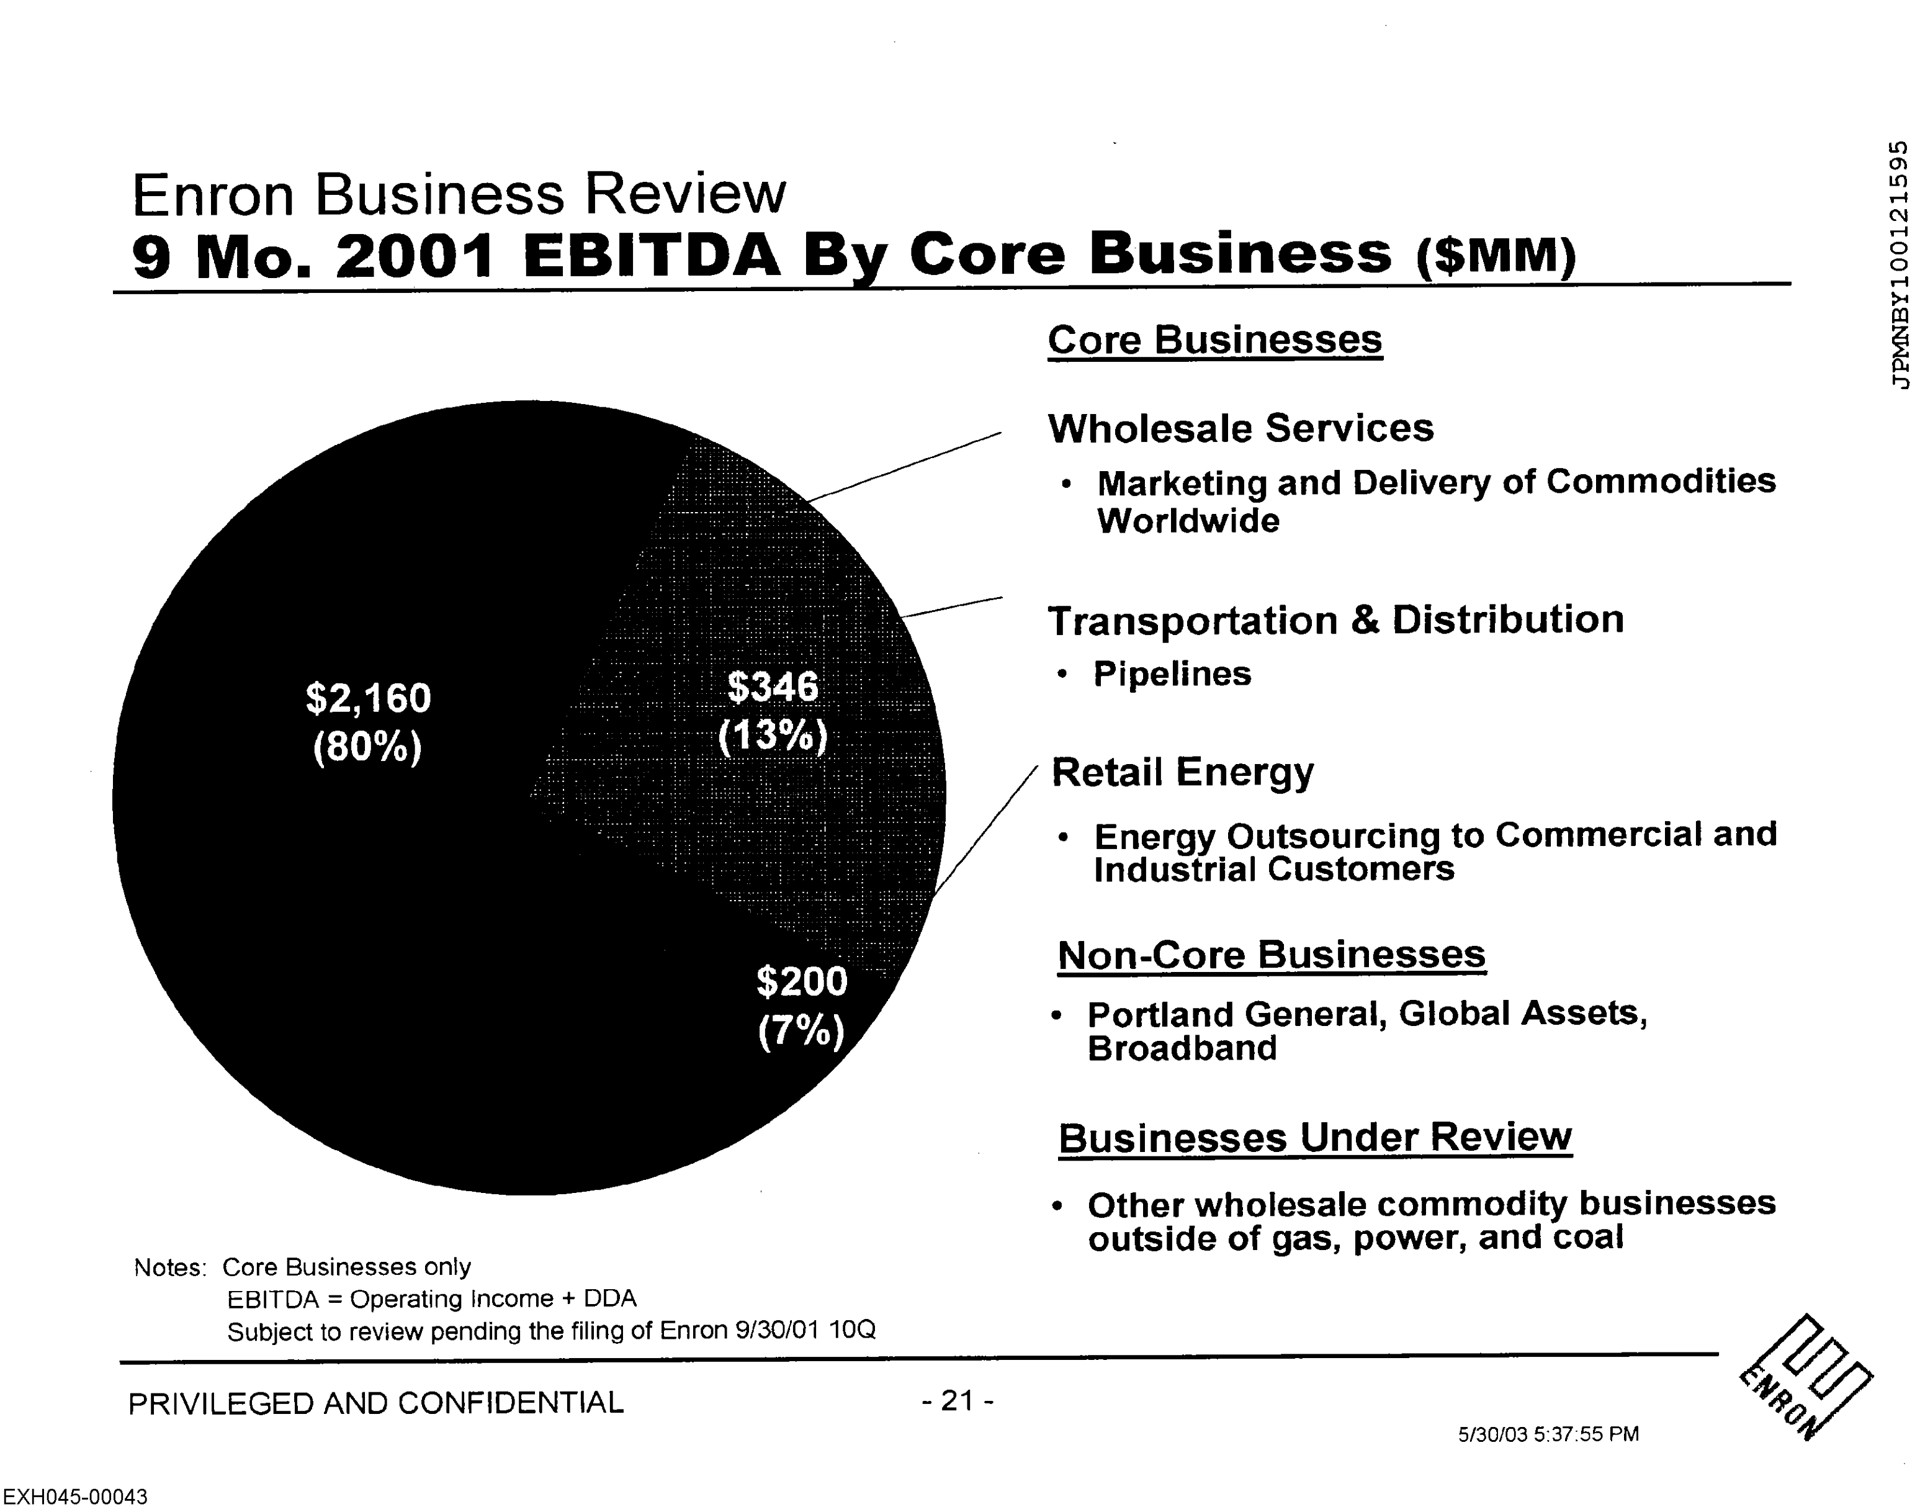 business review by core business | Enron